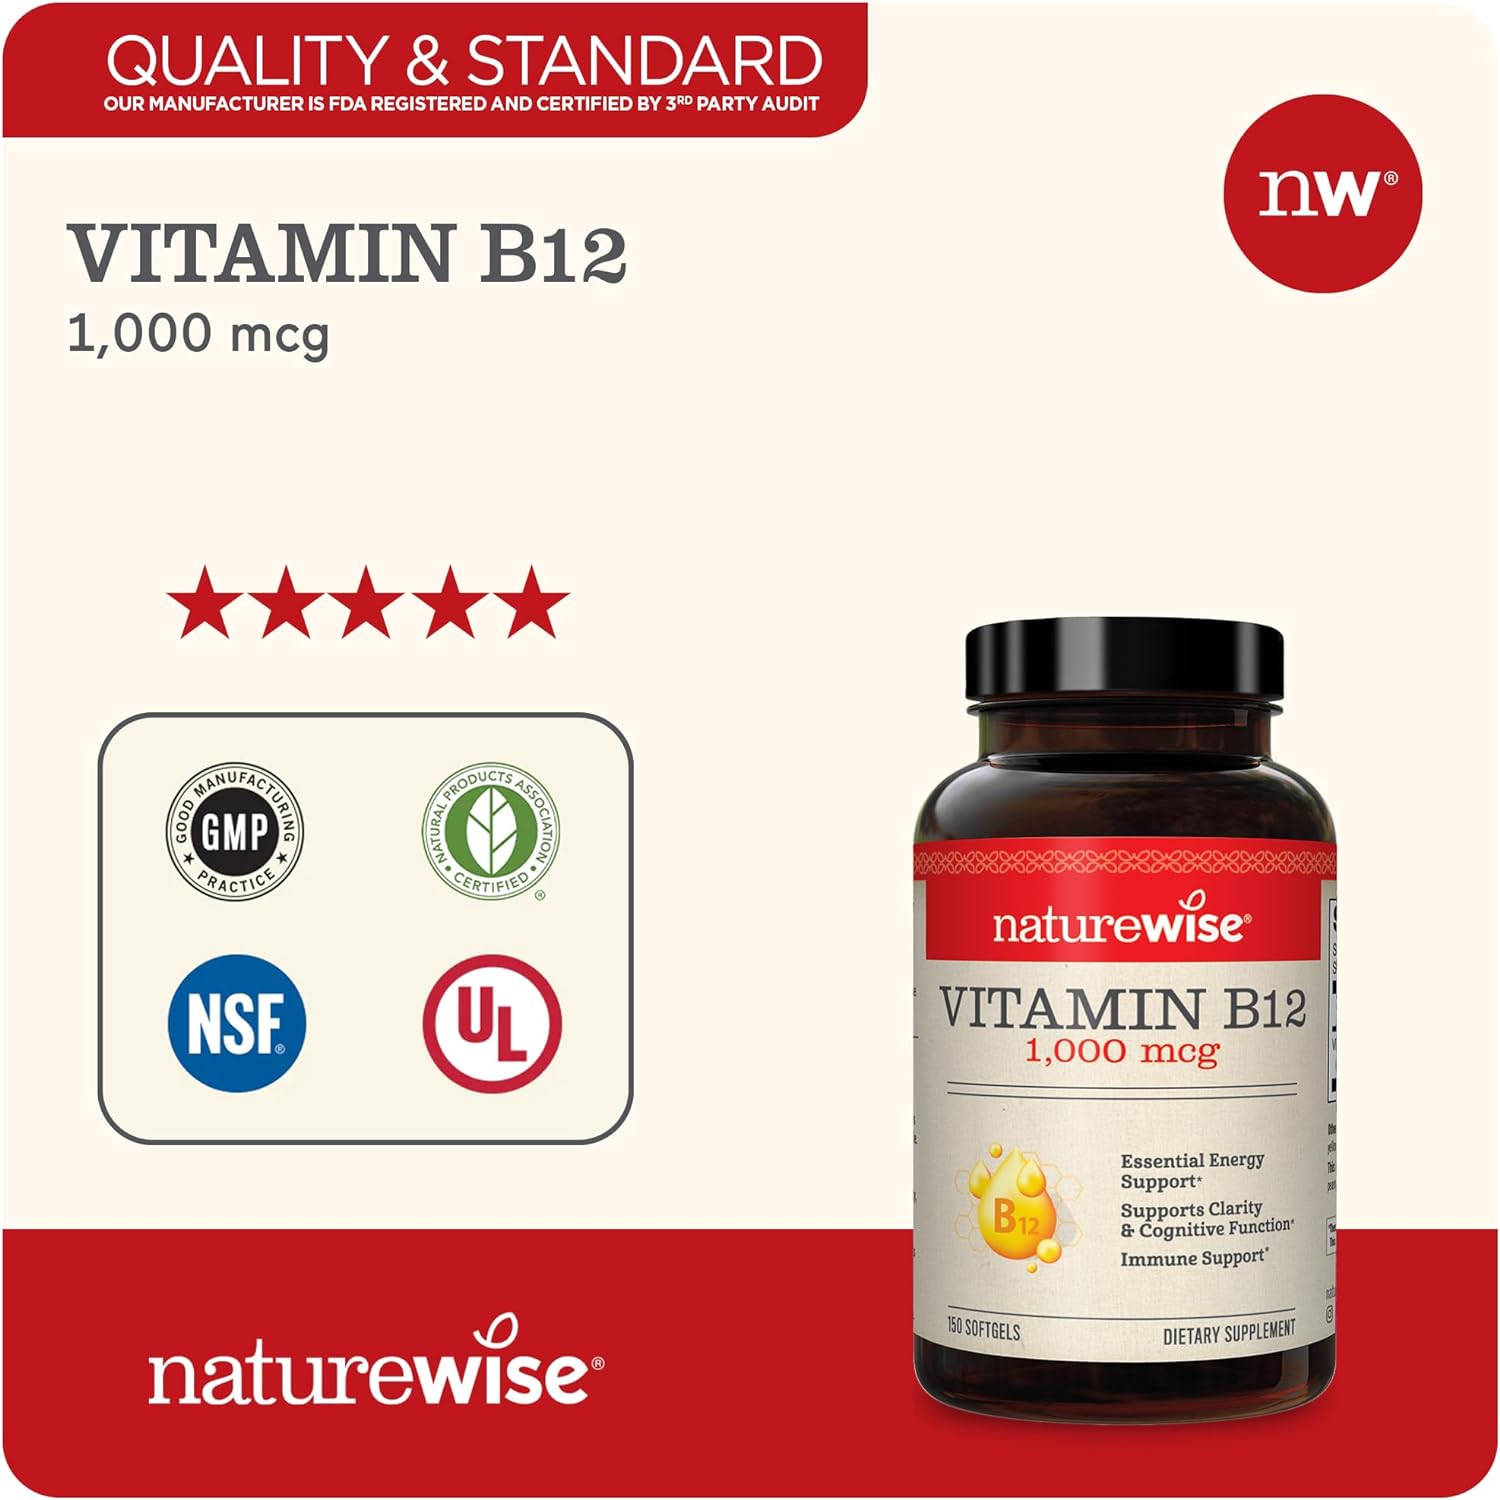 NatureWise Vitamin B12 1,000 mcg for Mental Clarity & Cognitive Function + Energy Support for Maximum Vitality and Wellbeing | B12 (60 softgels)